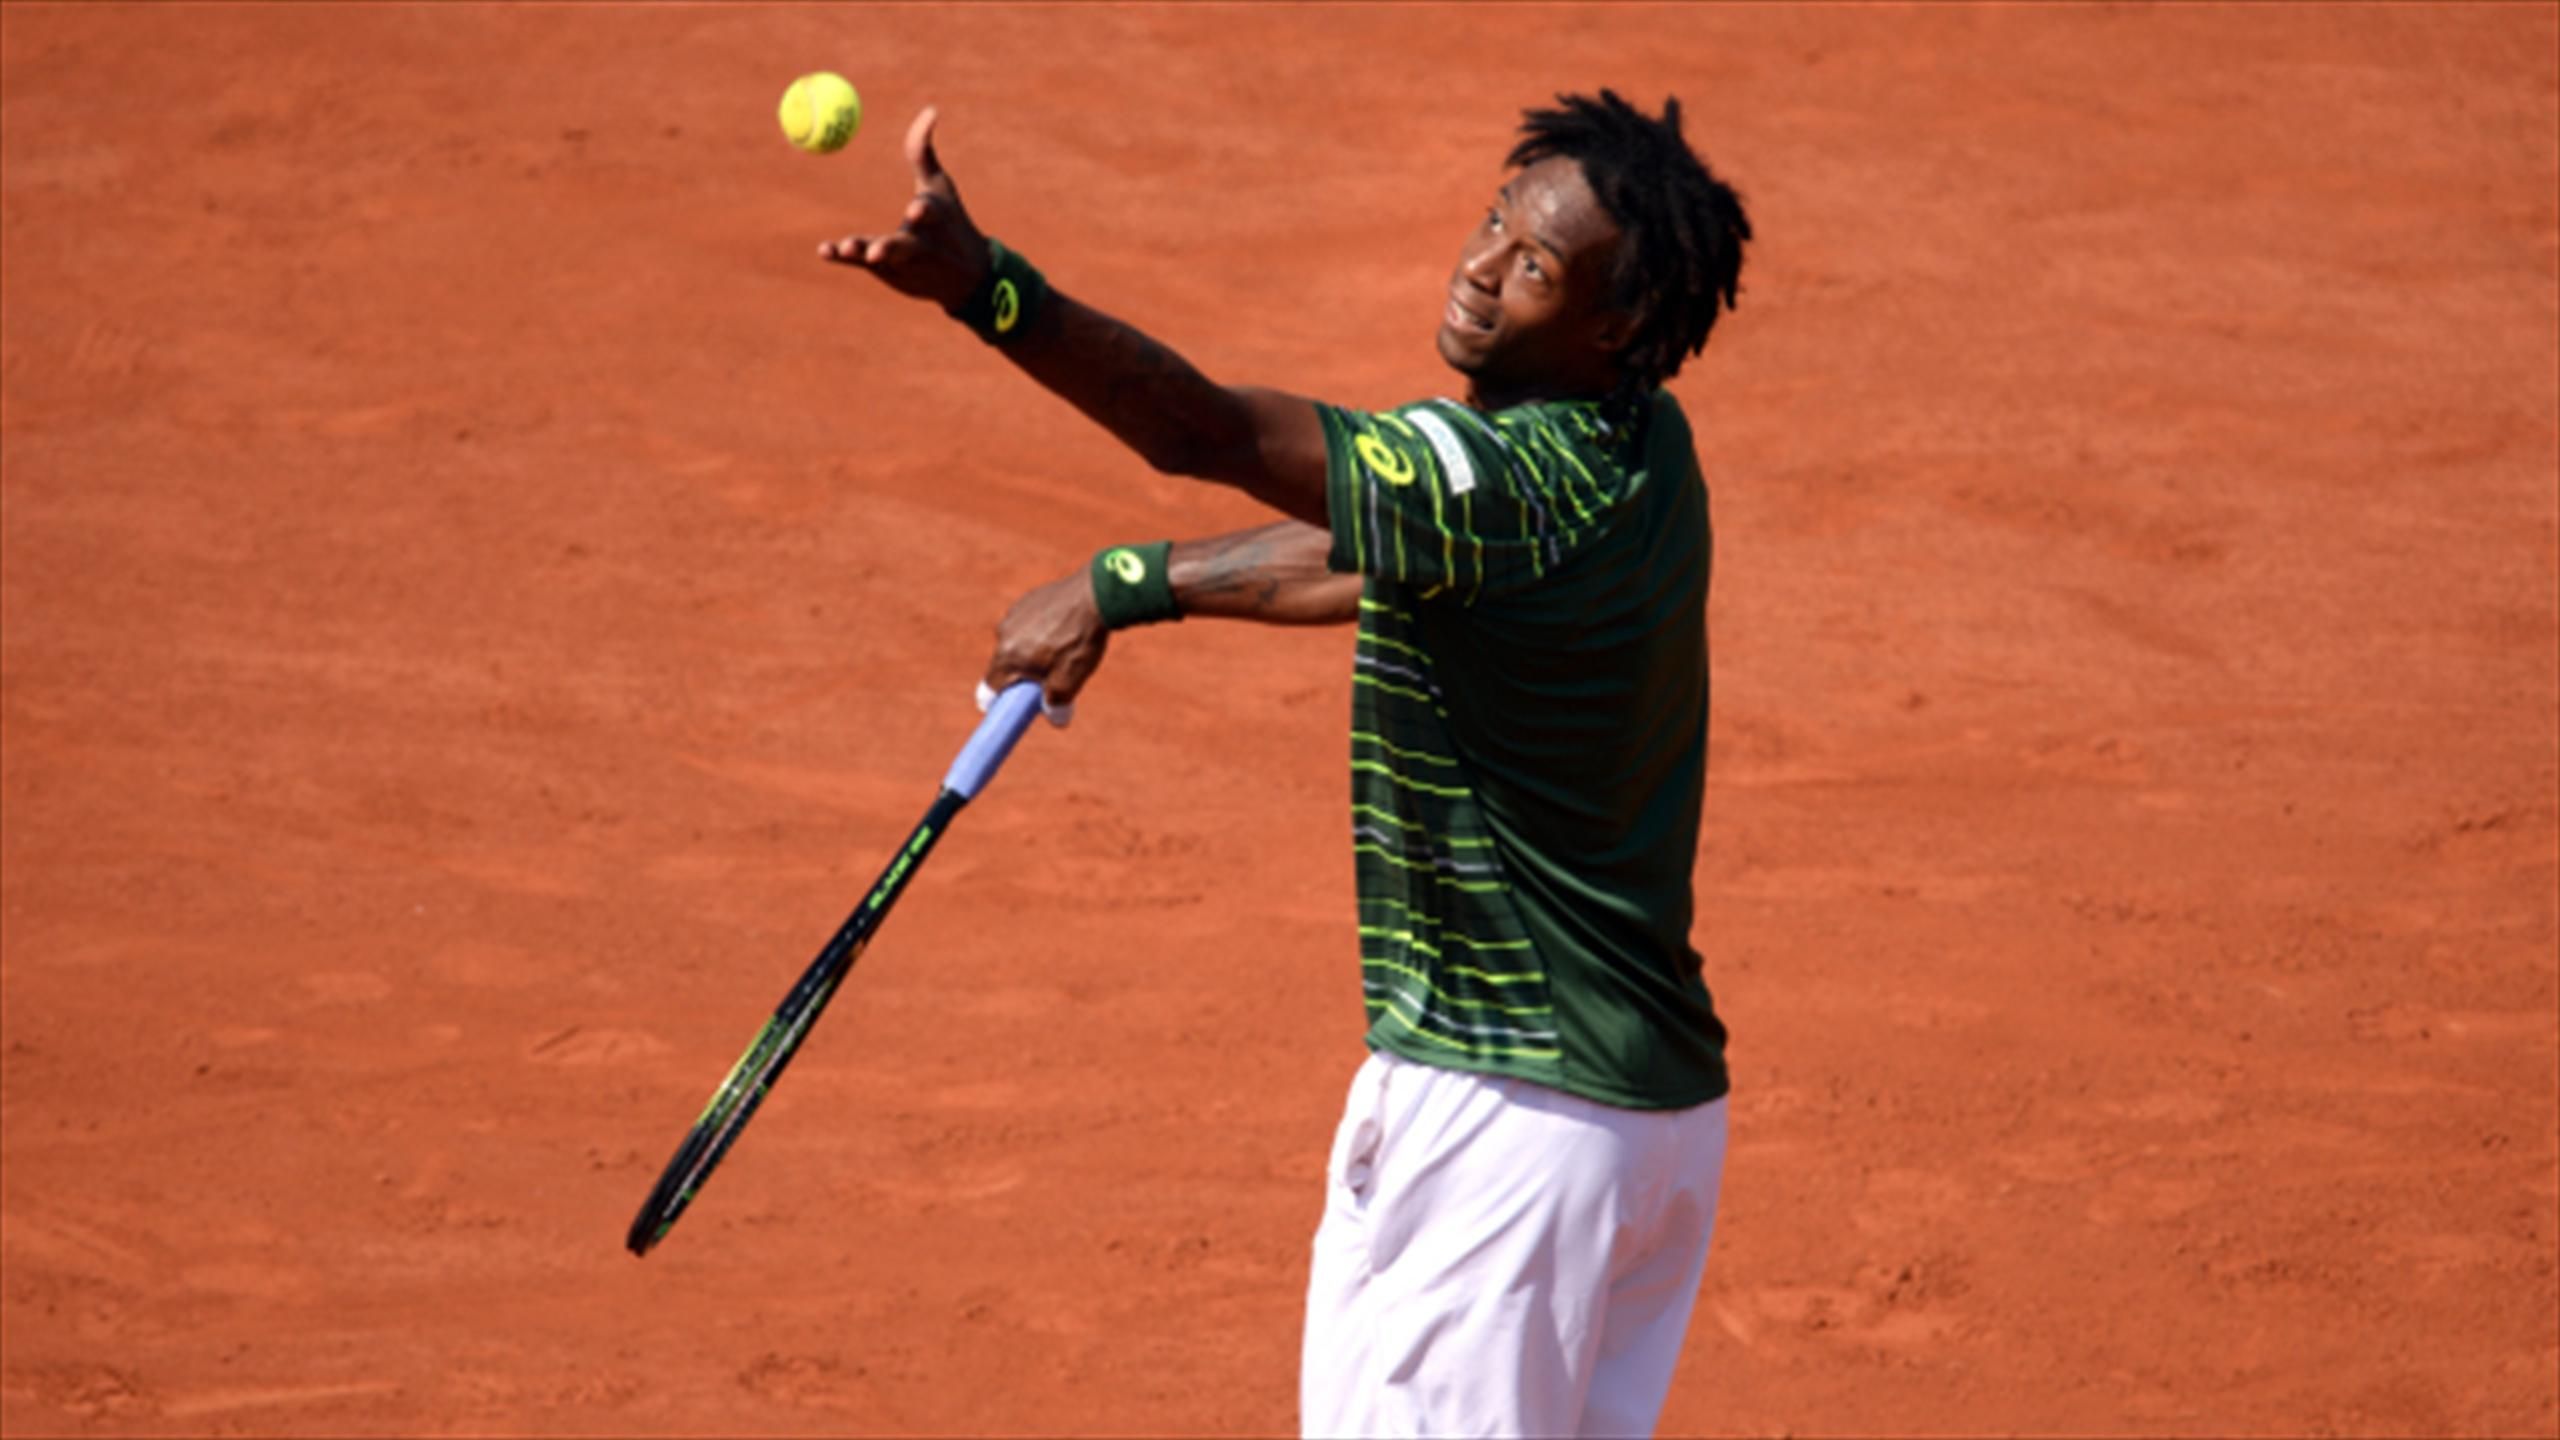 Gael Monfils pulls out of French Open due to virus